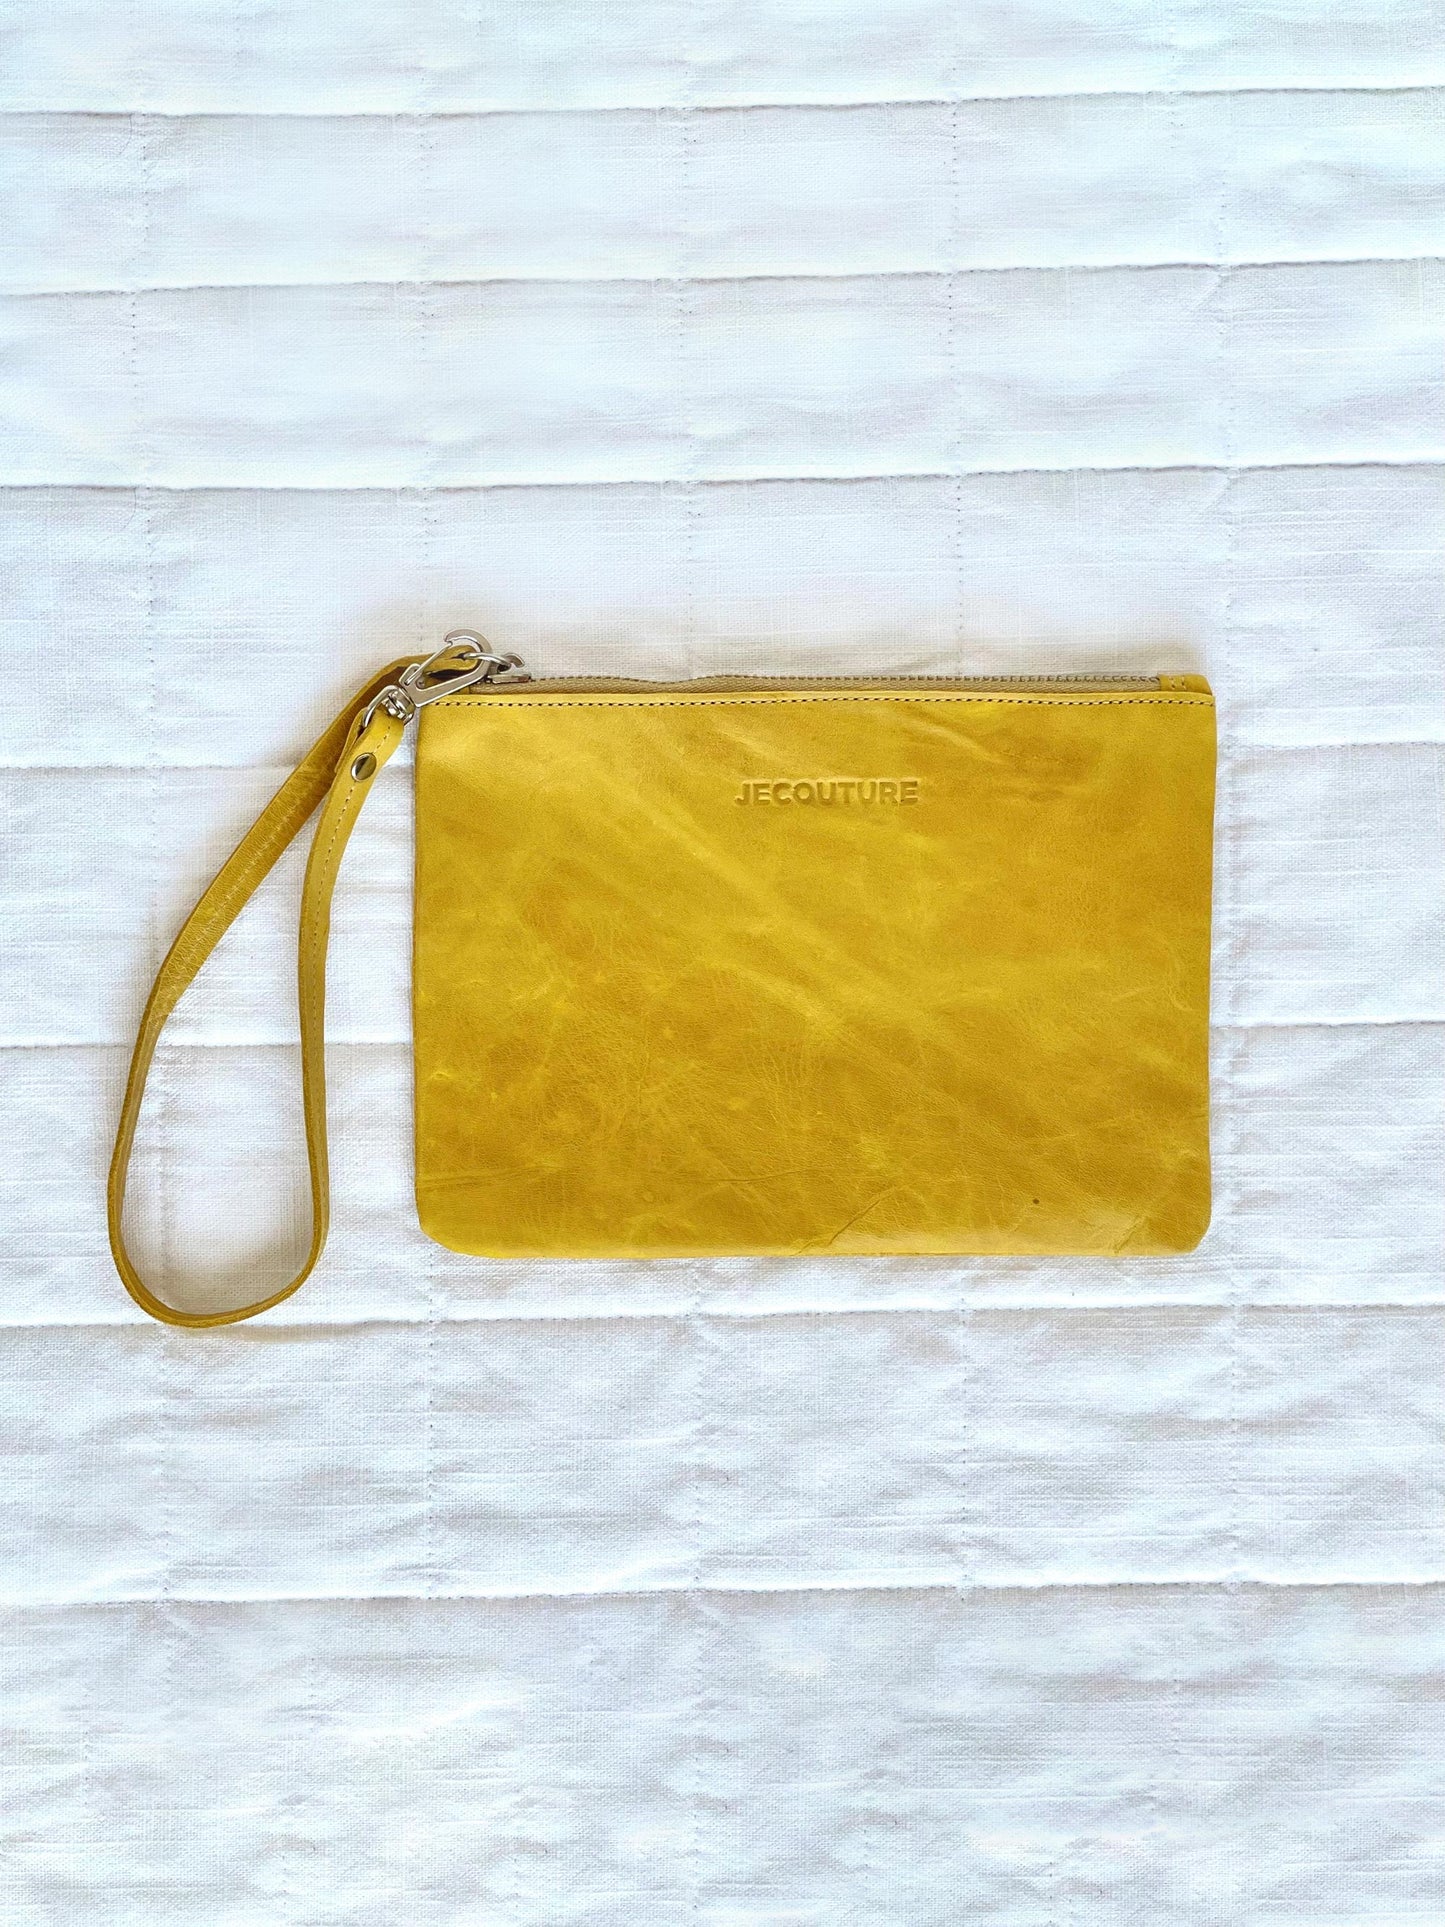 Je Couture - Tote Bag Yellow | Clutch